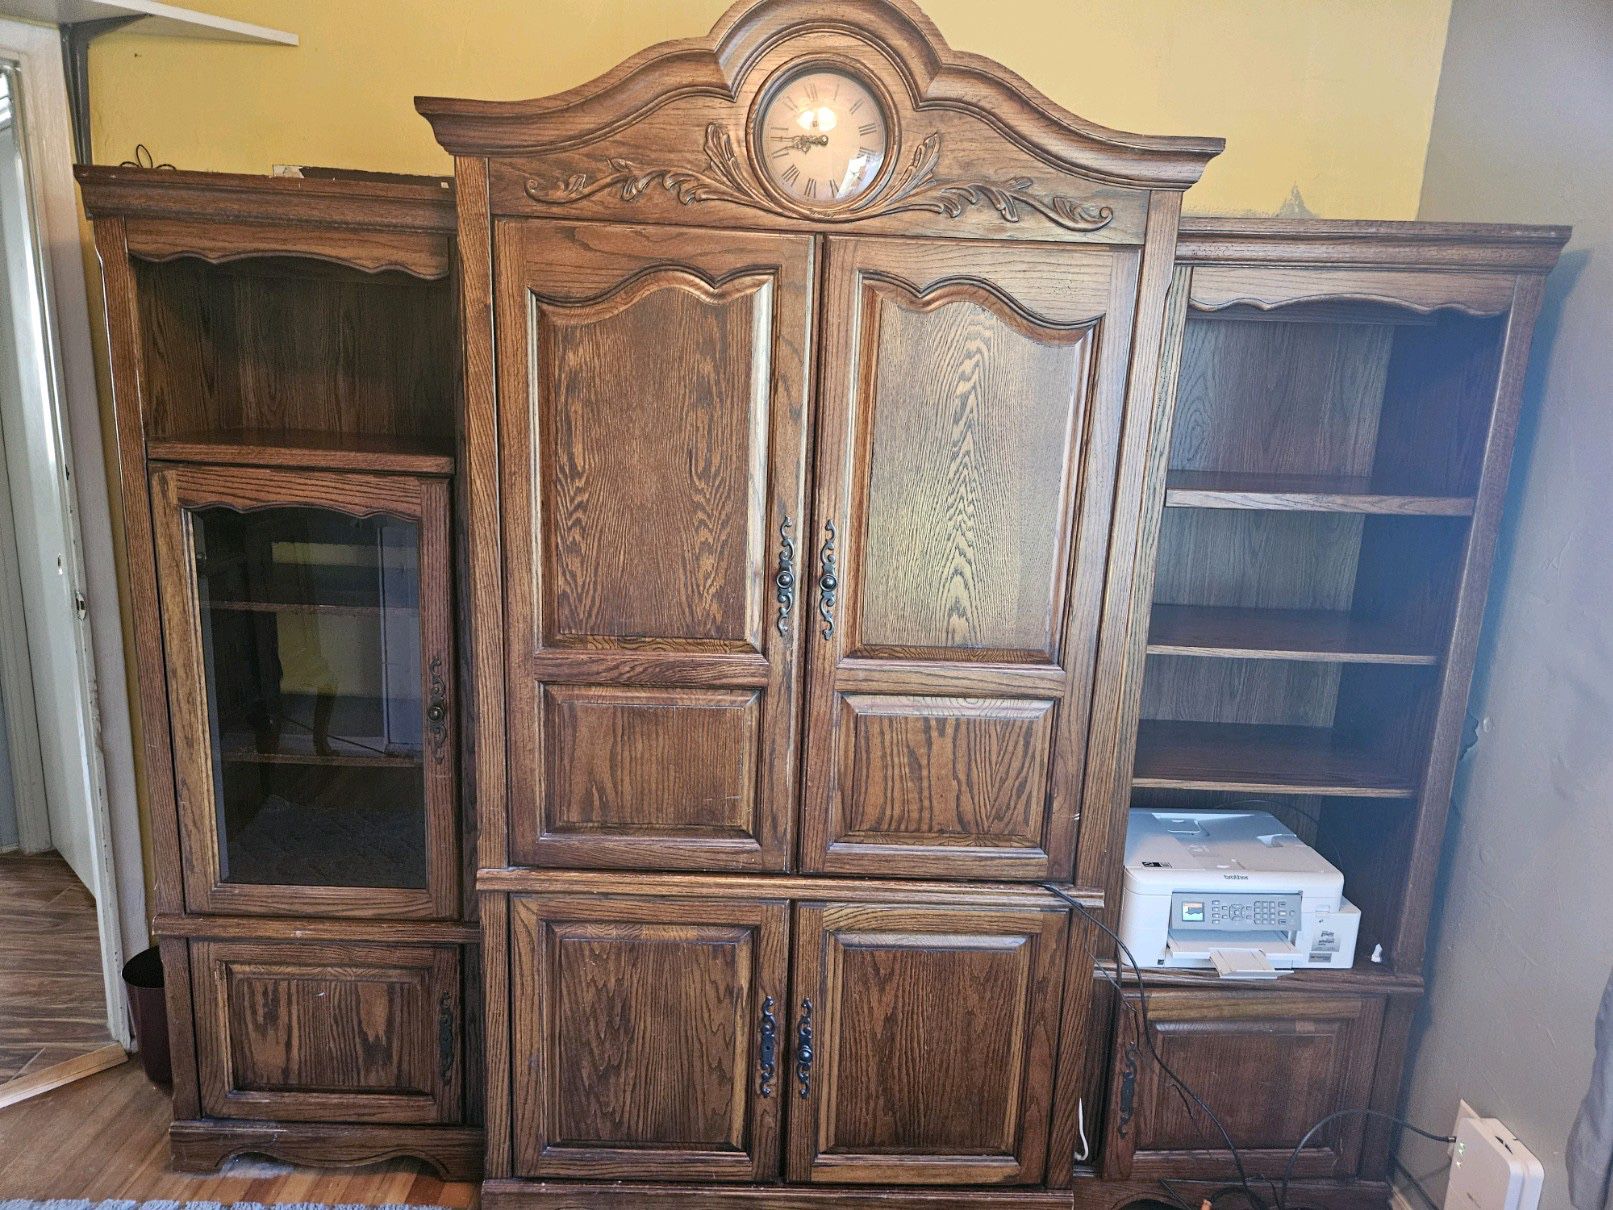 Entertainment Center with built in clock  and two book shelves 